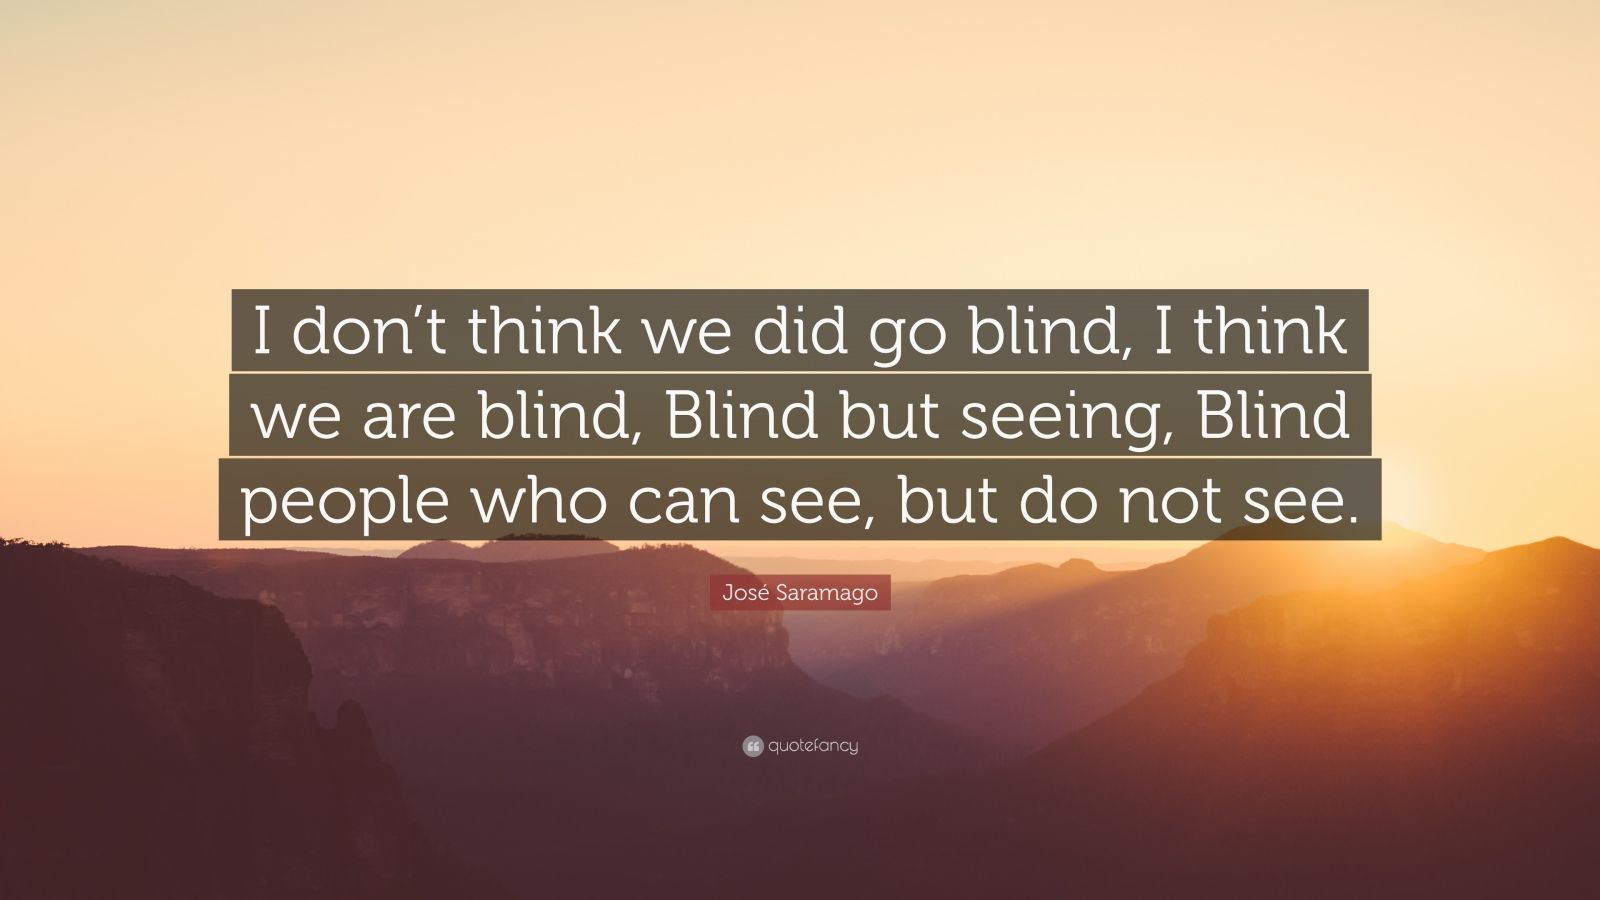 José Saramago Quote: “I don’t think we did go blind, I think we are ...